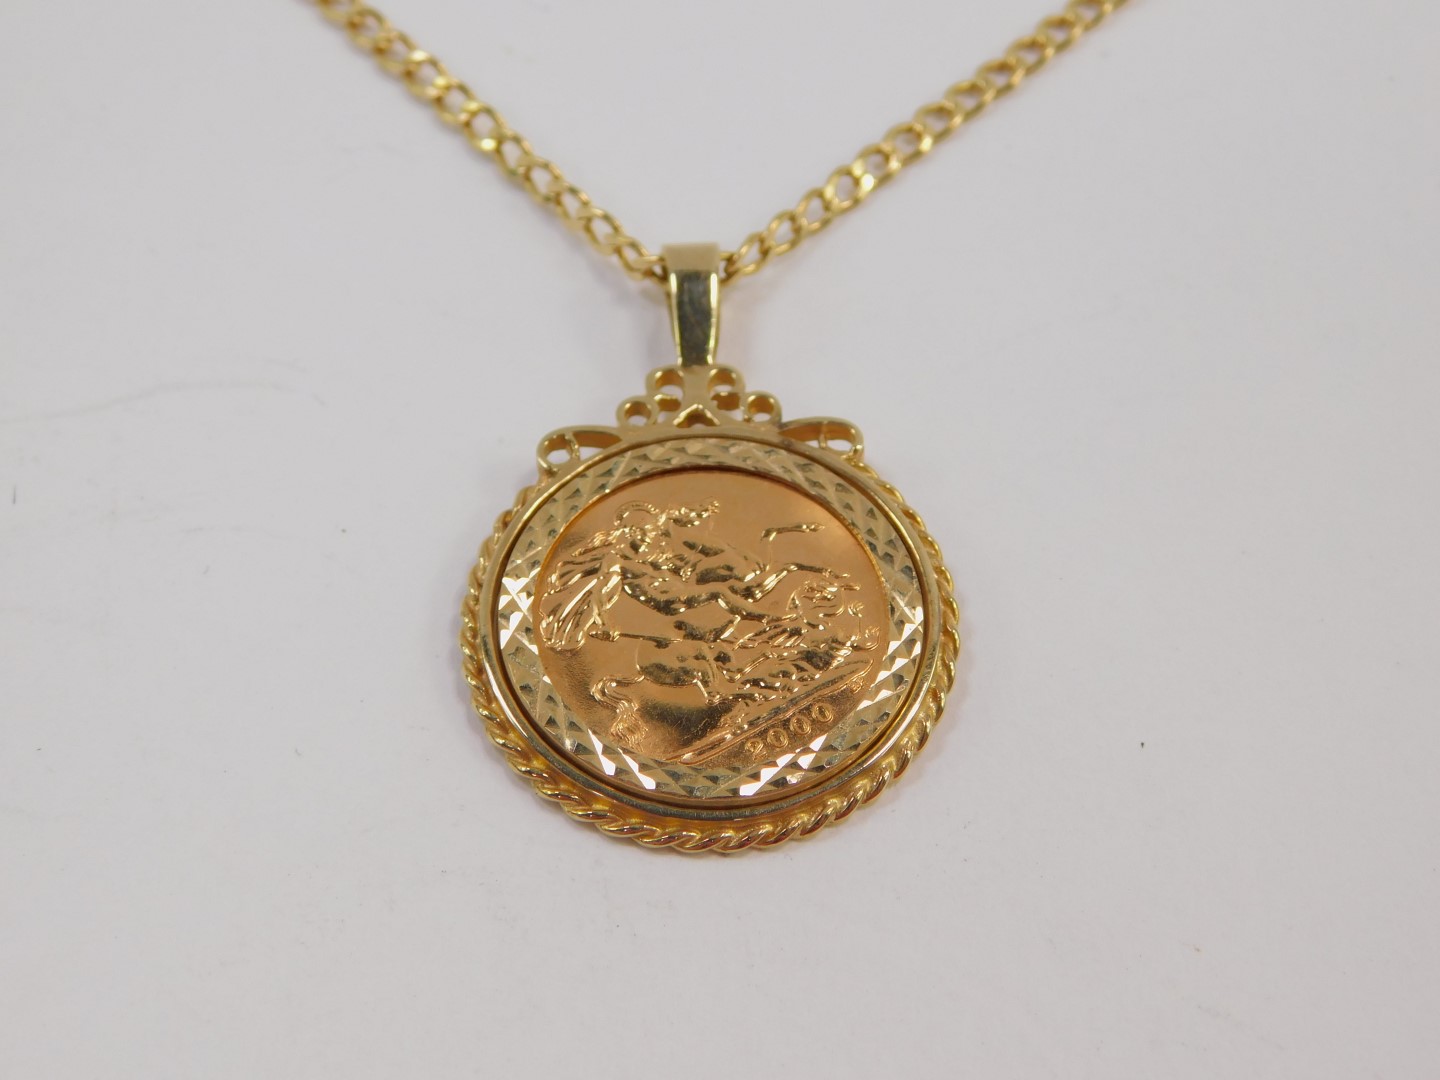 An Elizabeth II gold half sovereign 2000, 9ct gold pendant mounted on chain, 8.2g. - Image 2 of 4